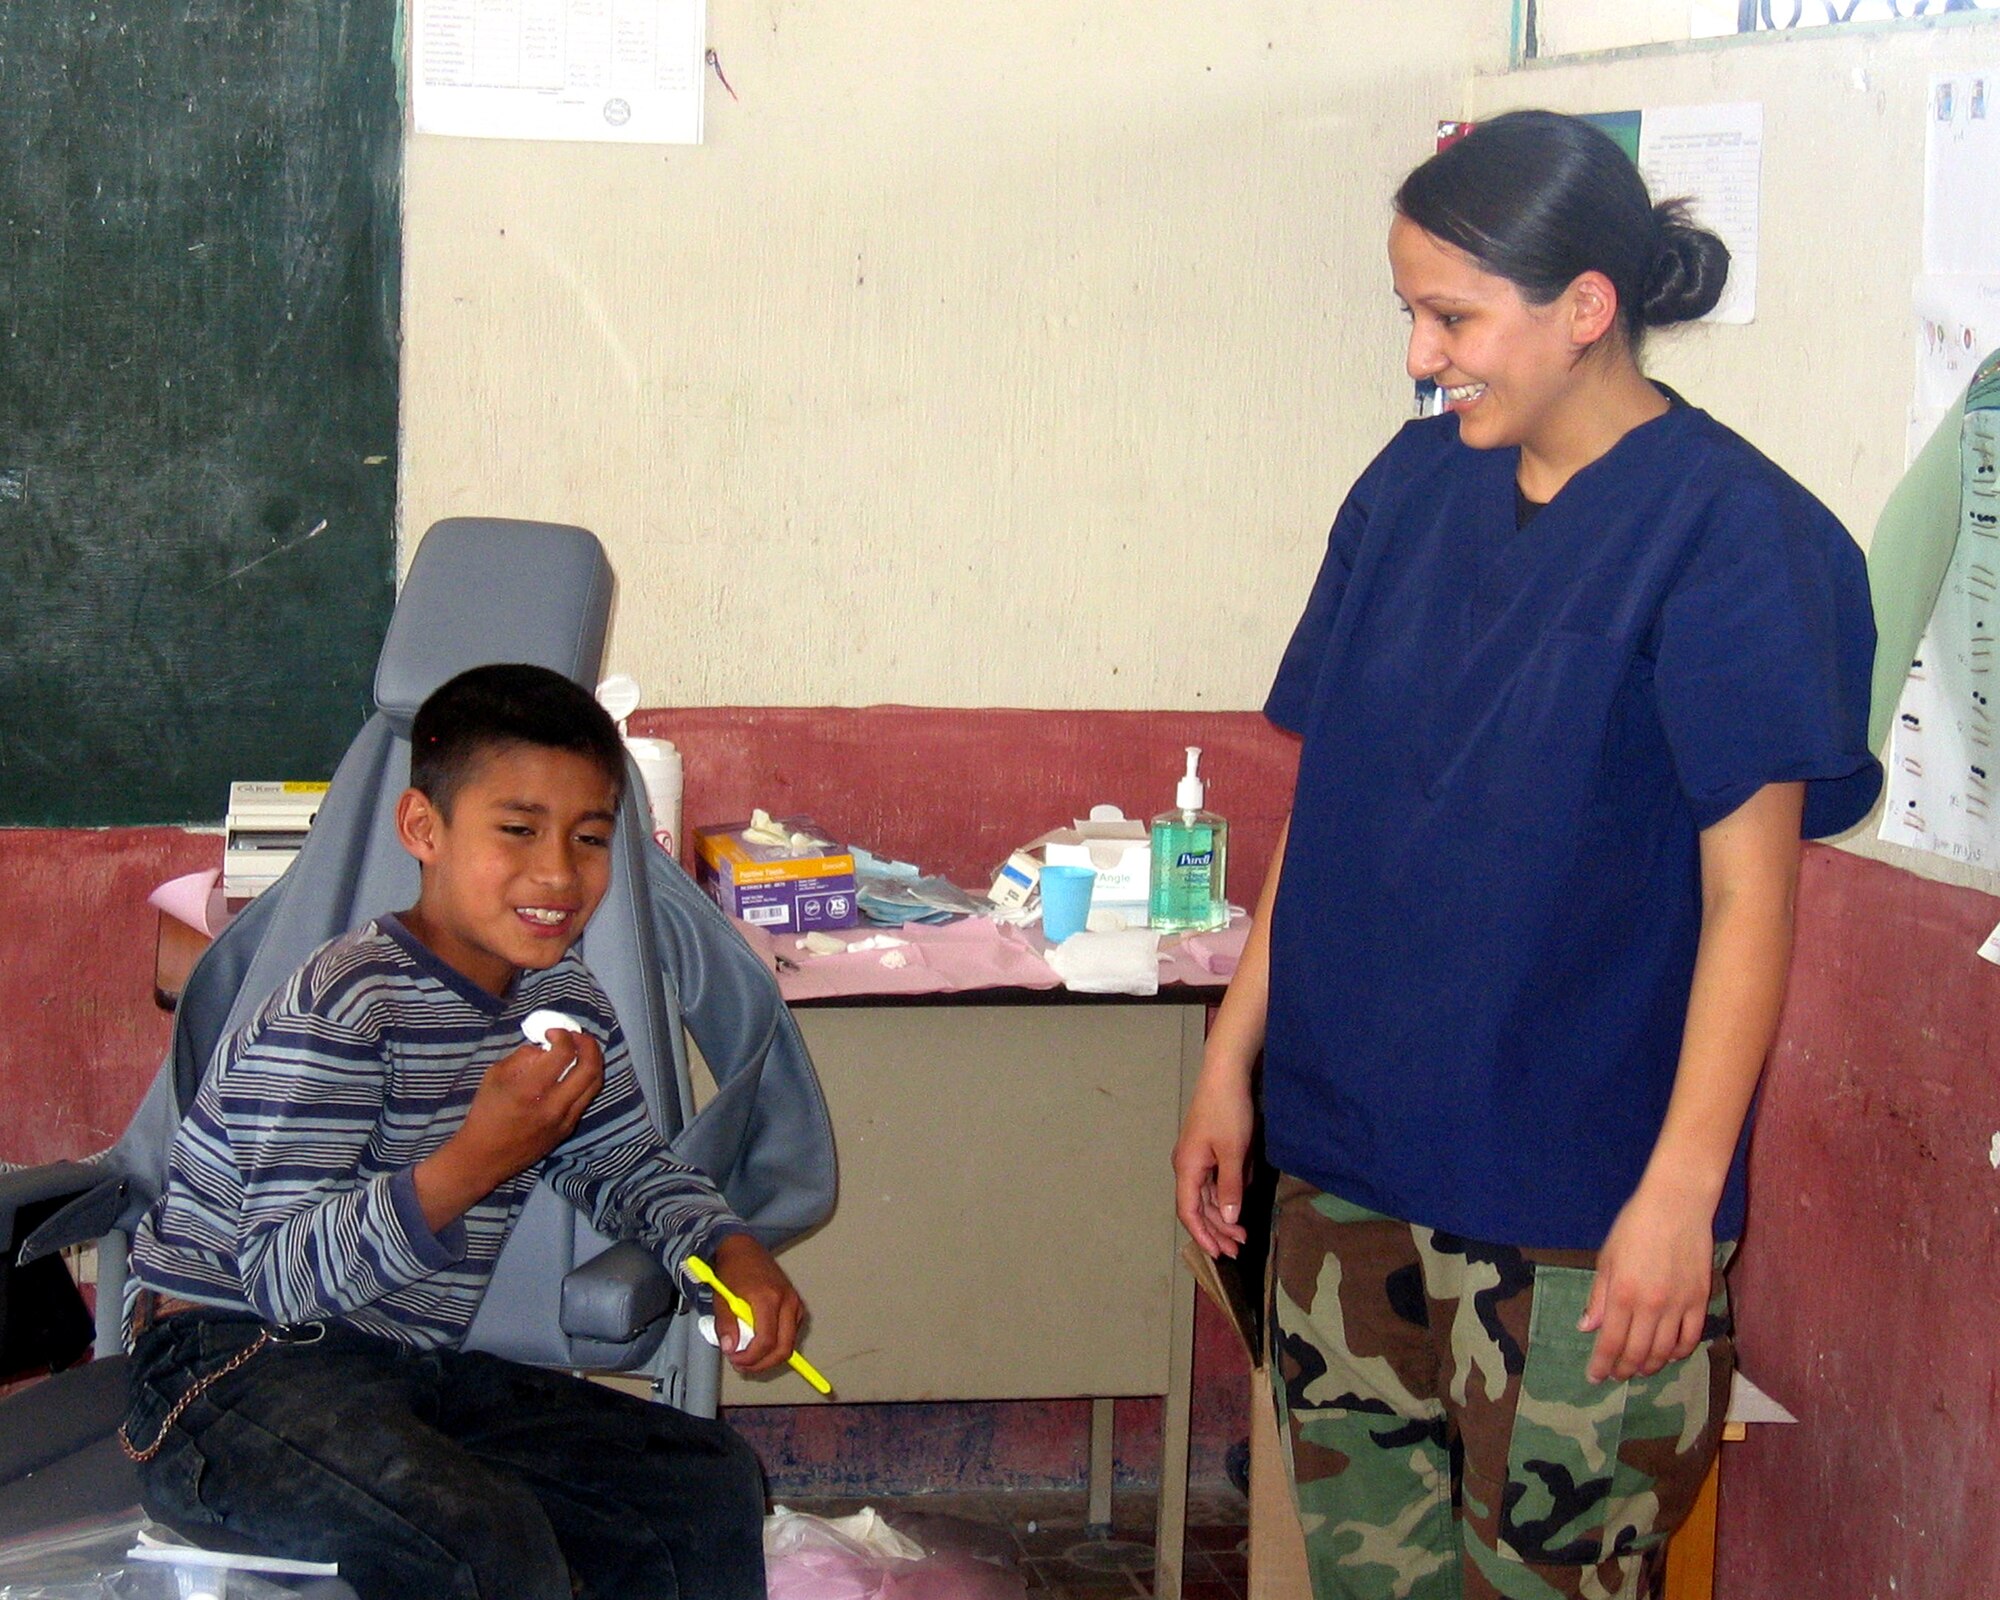 Airman 1st Class Laura Valenzuela De La Hoya, a dental technician from Vandenberg AFB, Calif., shares a laugh with a Guatemalan child after his dental visit. Airman Valenzuela De La Hoya assisted in extracting nearly 900 teeth and restoring another 85 during a 10-day humanitarian mission to various regions of Guatemala in April. (U.S. Air Force photo)